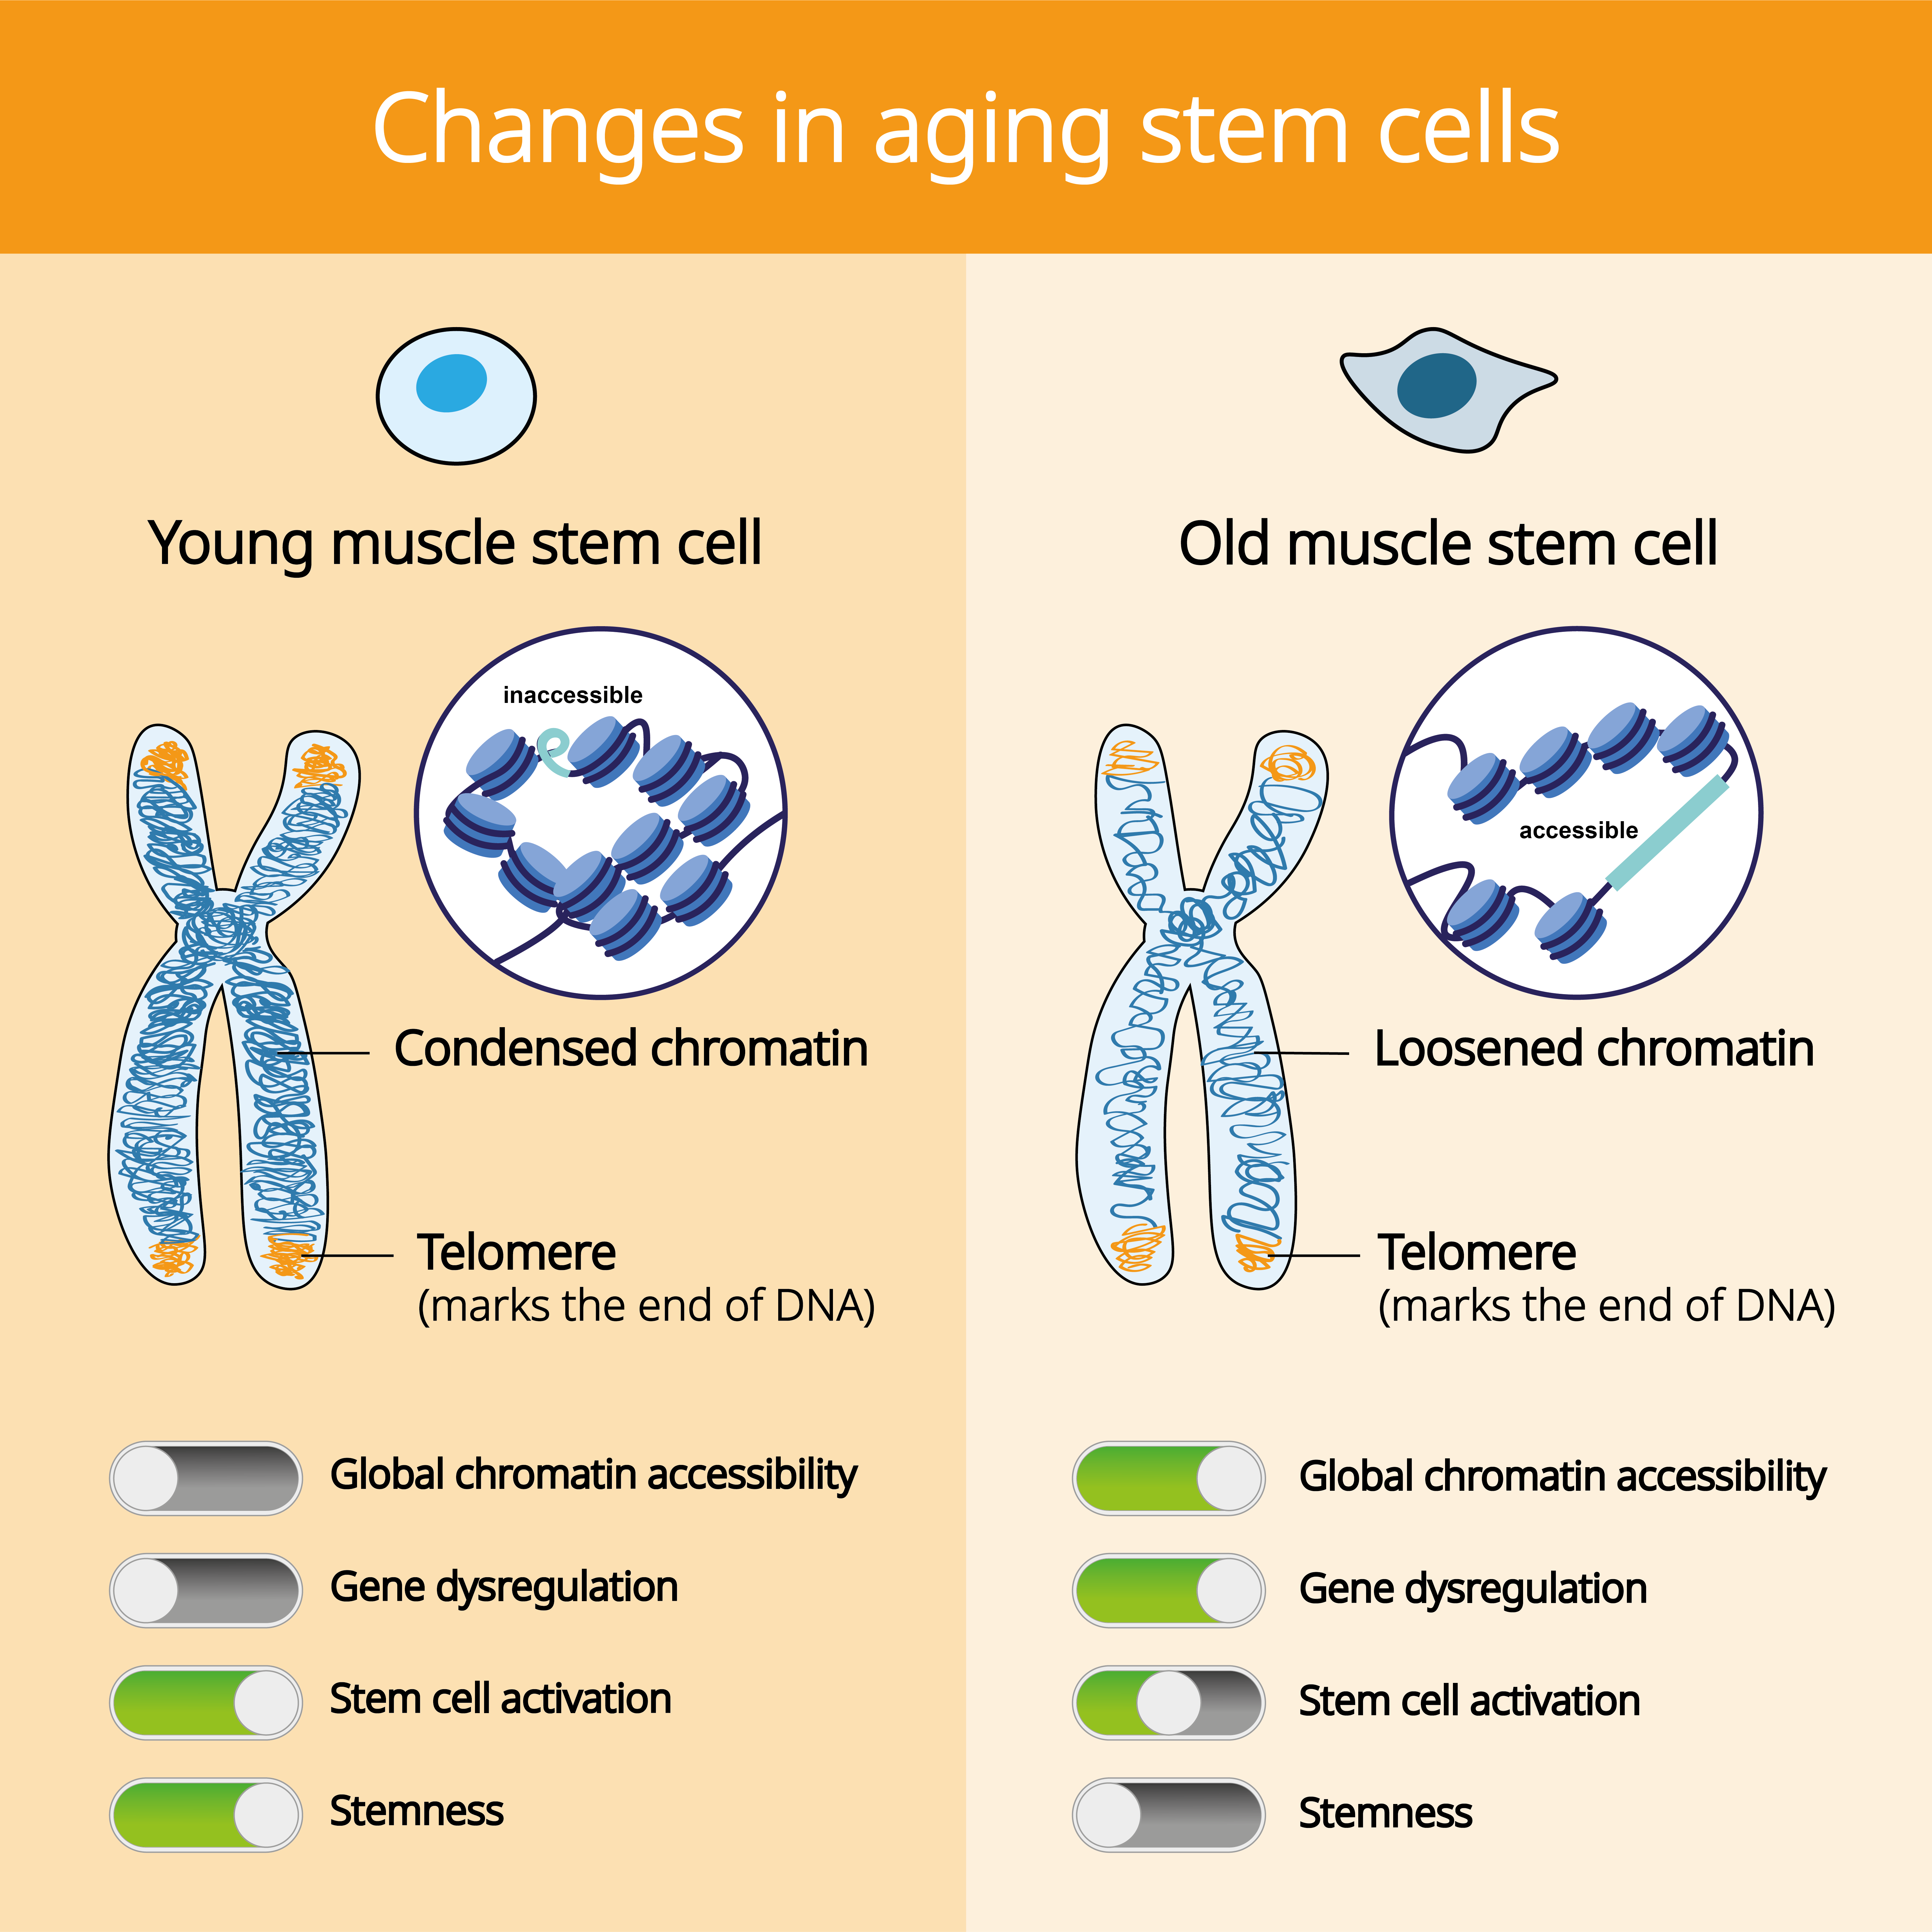 Changes in aging stem cells